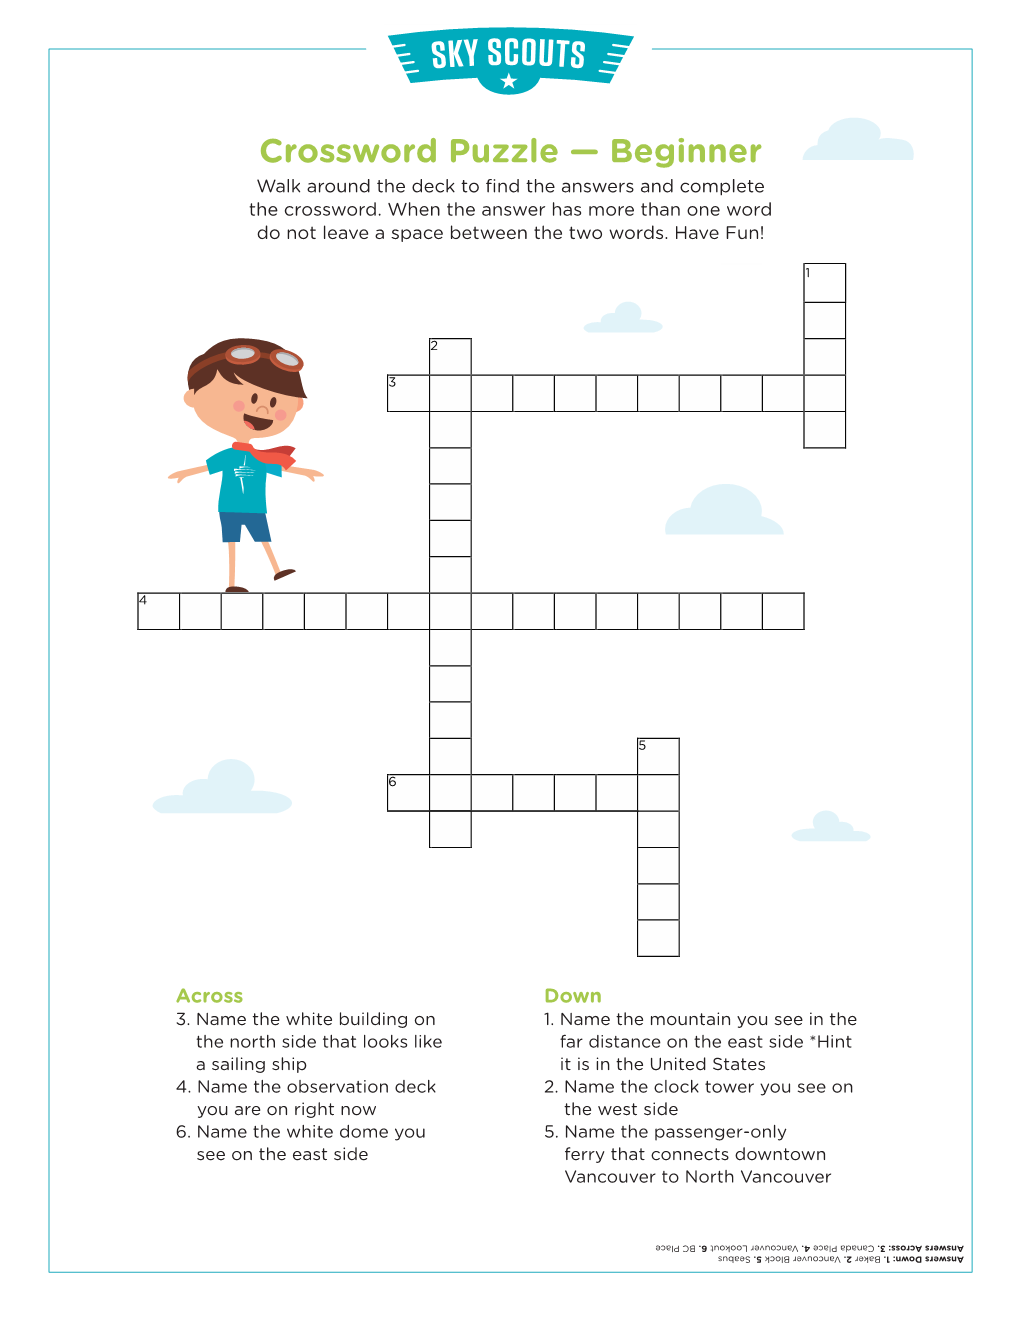 Crossword Puzzle — Beginner Walk Around the Deck to ﬁ Nd the Answers and Complete the Crossword